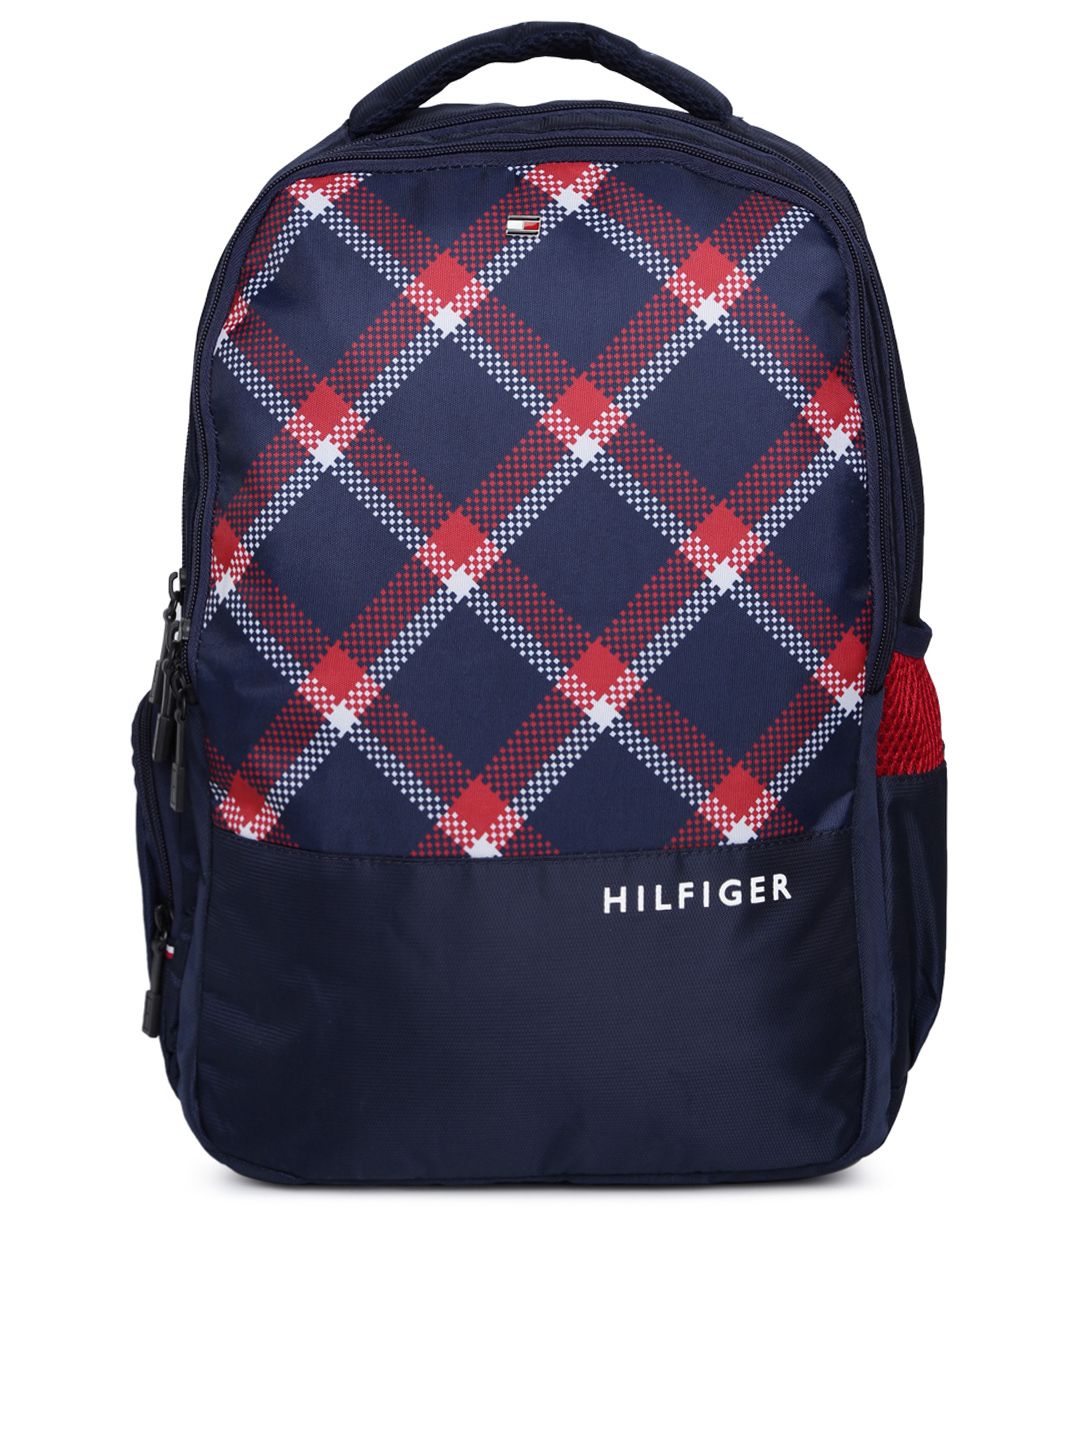 Tommy Hilfiger Unisex Navy Blue & White Backpack Price in India